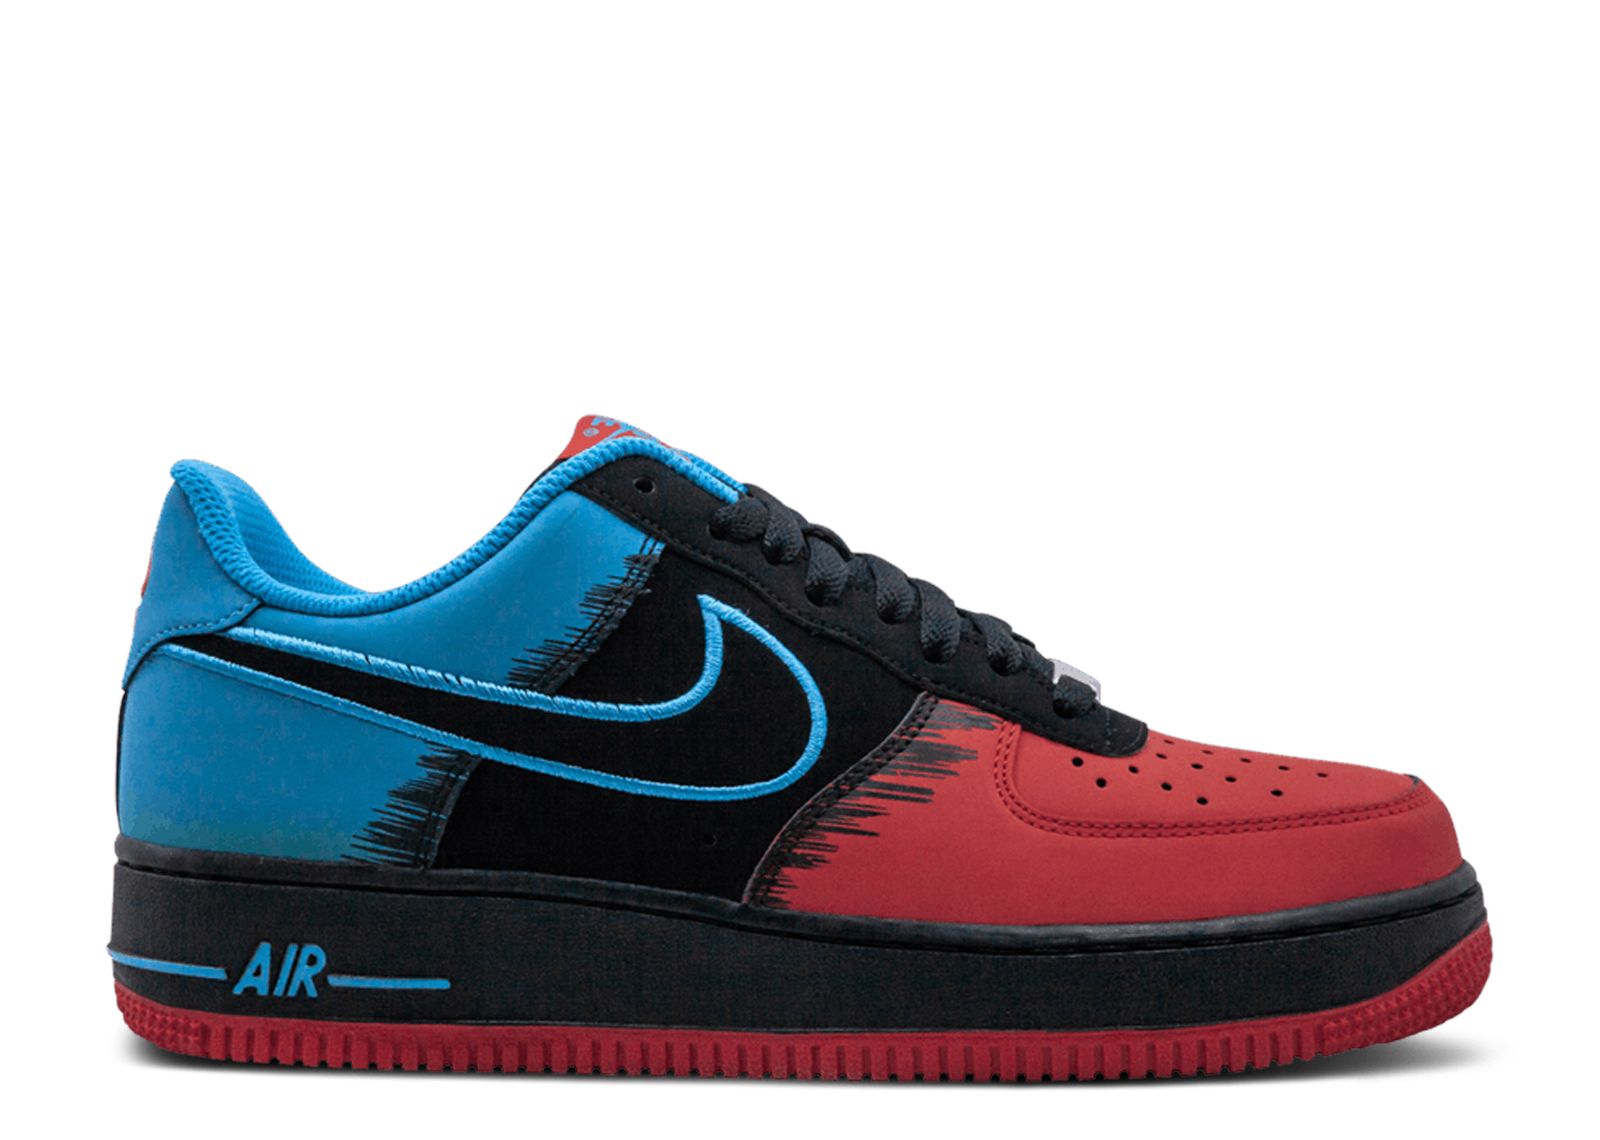 spider verse air force ones